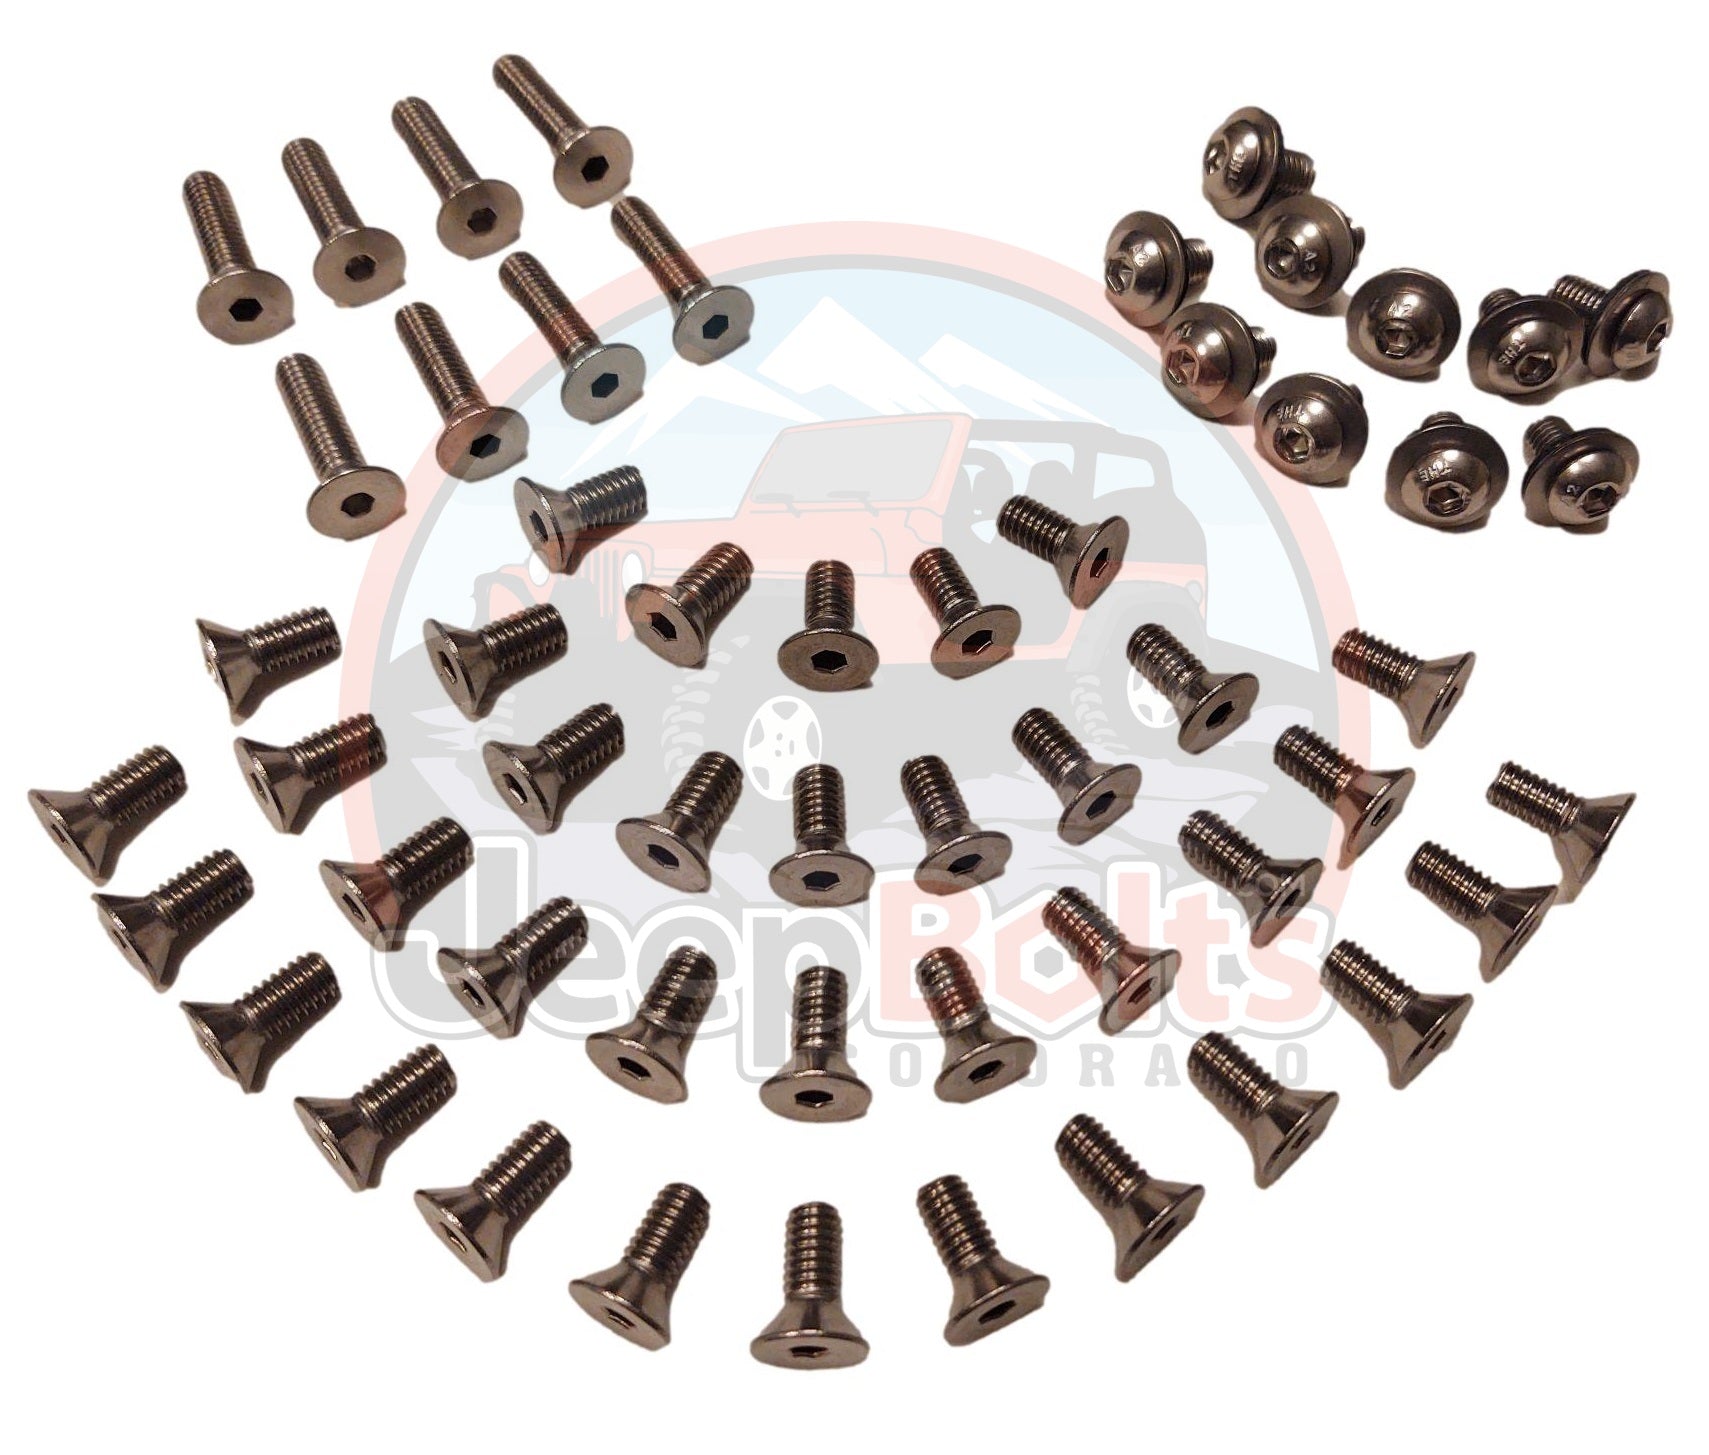 YJ Jeep Wrangler Full Replacement Bolt Set Rust Proof Stainless Steel Bolts